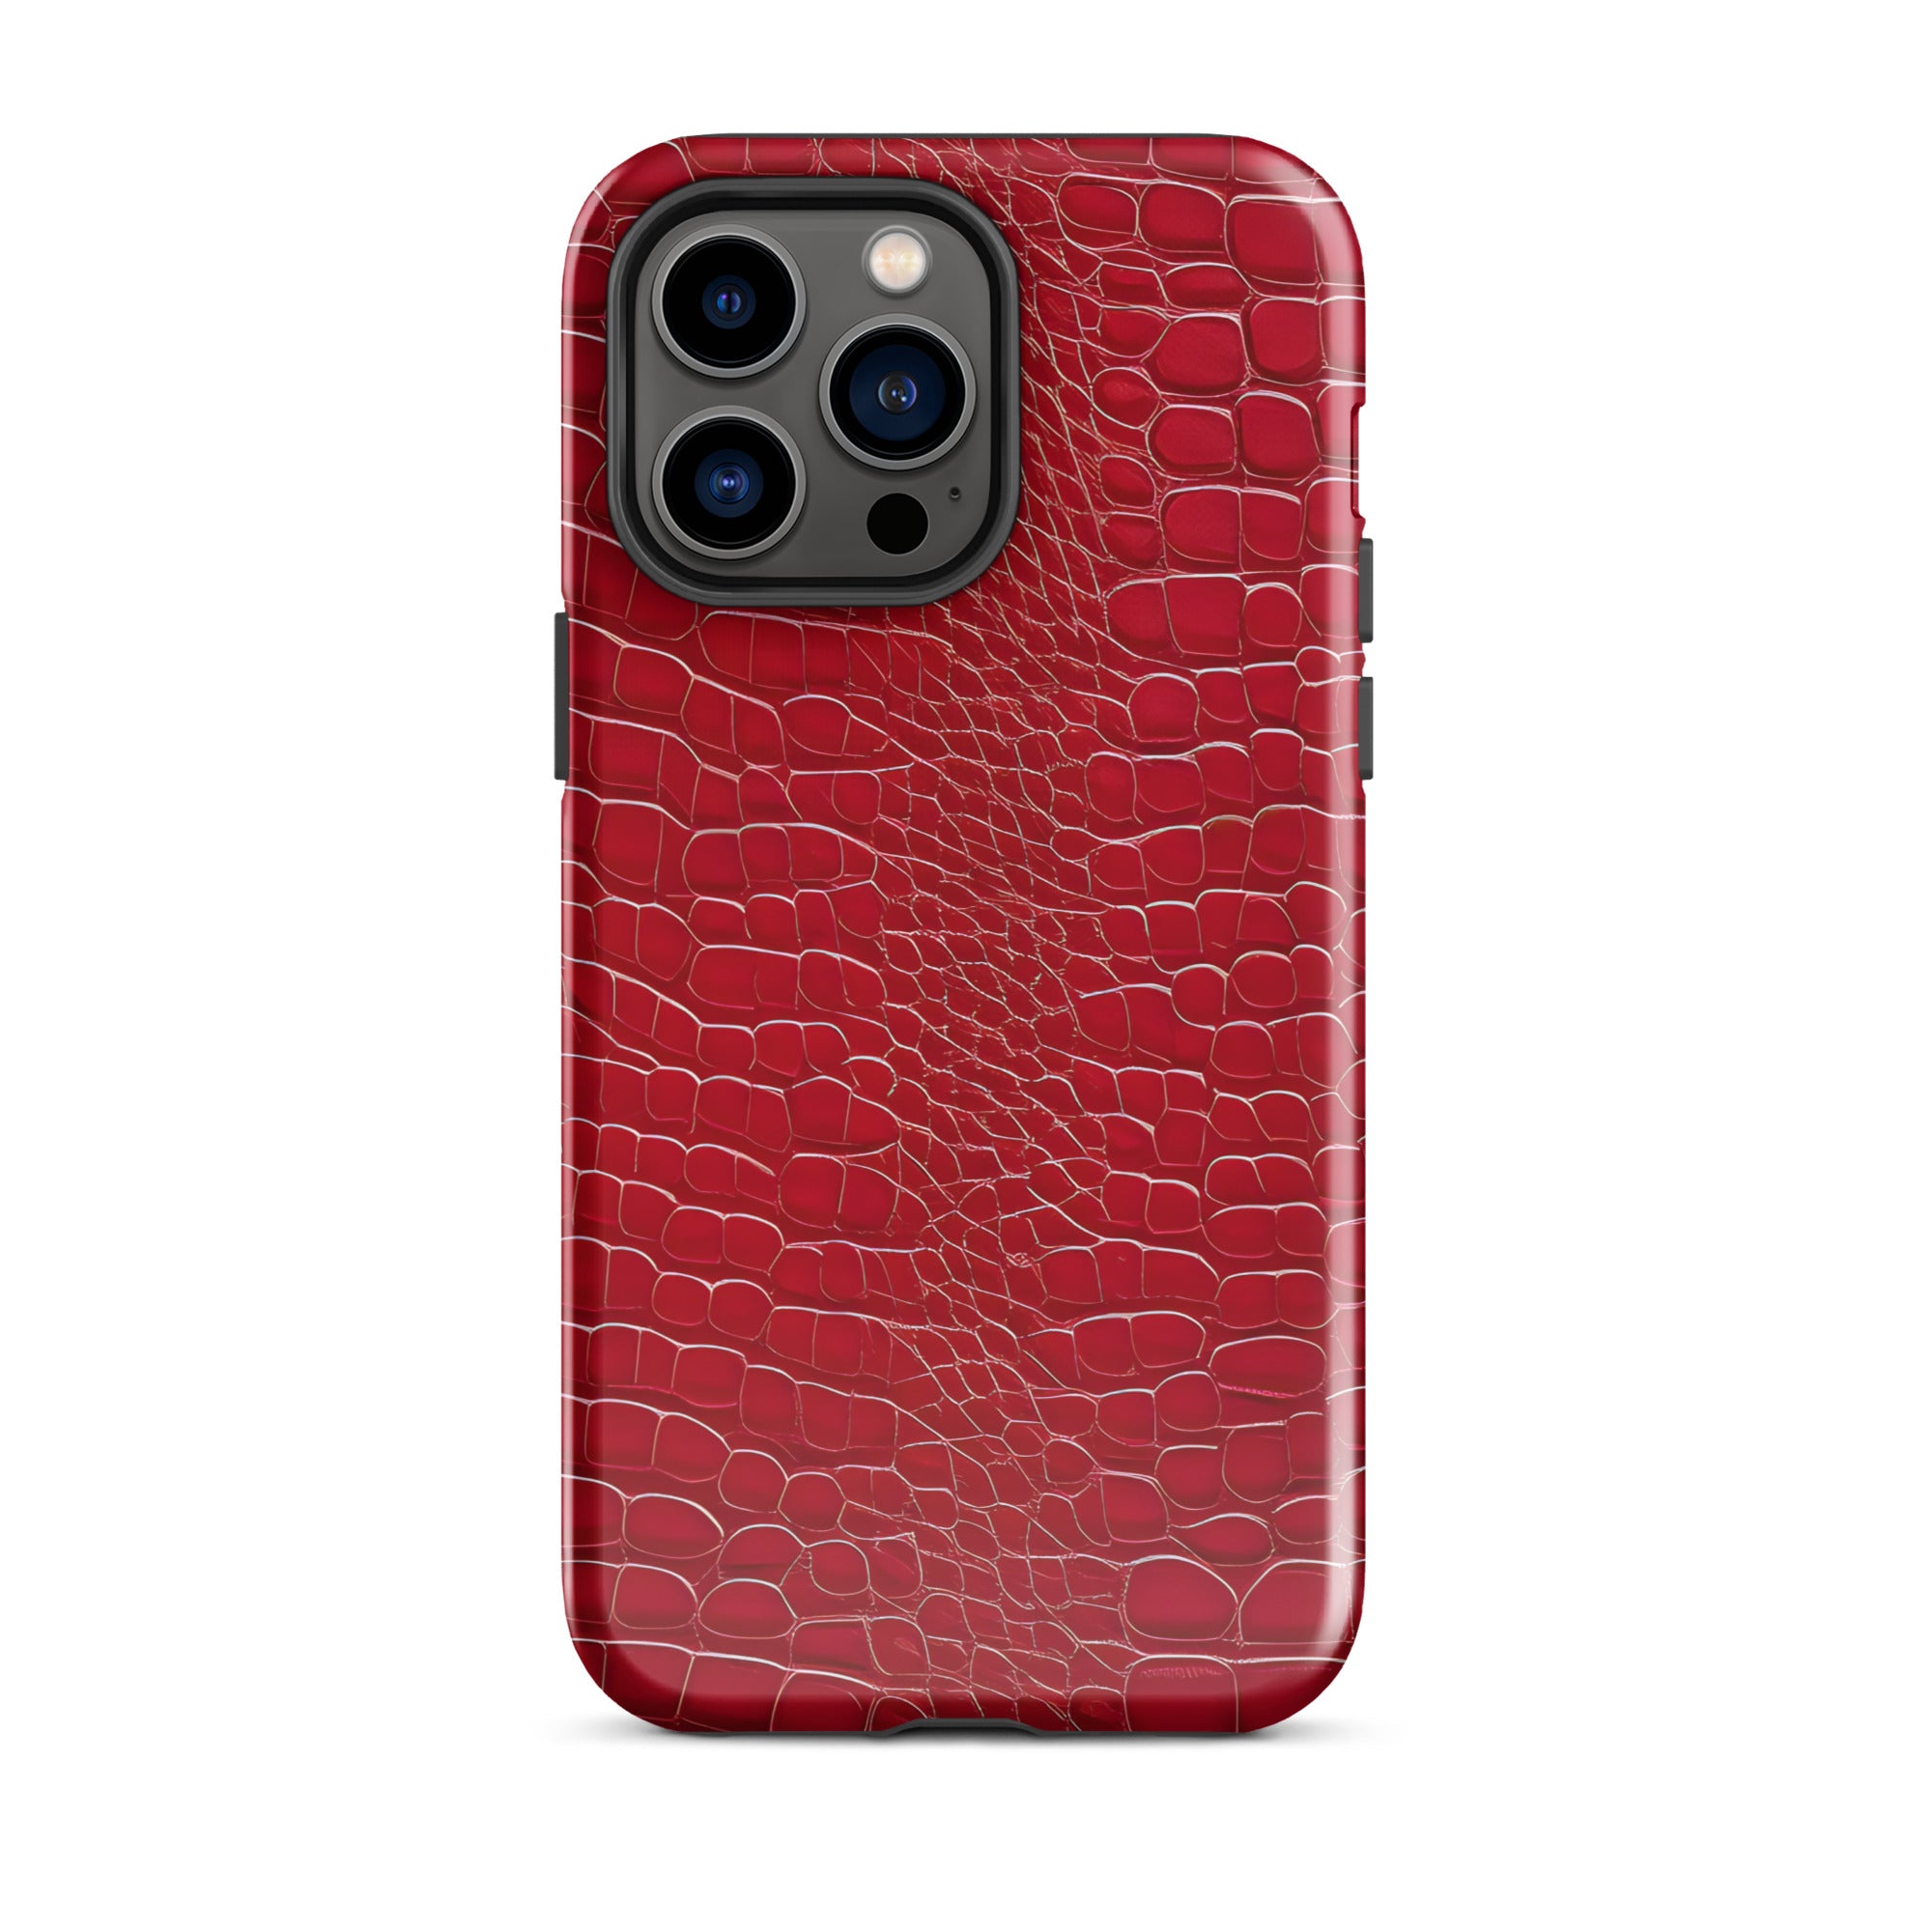 tough-case-for-iphone-glossy-iphone-14-pro-max-front-656383d5b5c82.jpg